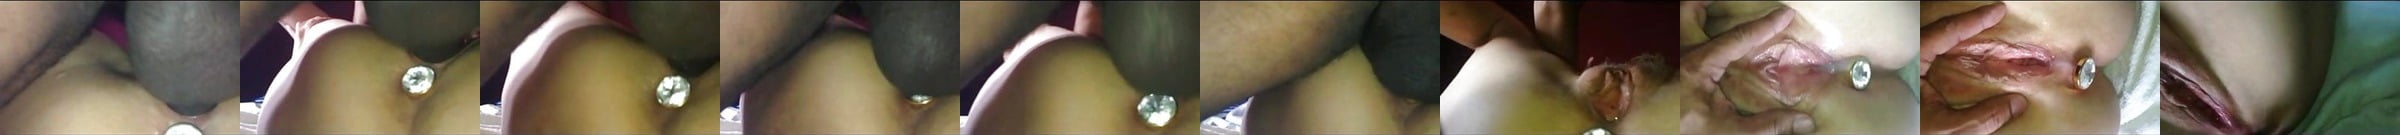 Closeup Of The BBC Monster Filling My Wife Free Porn 21 XHamster